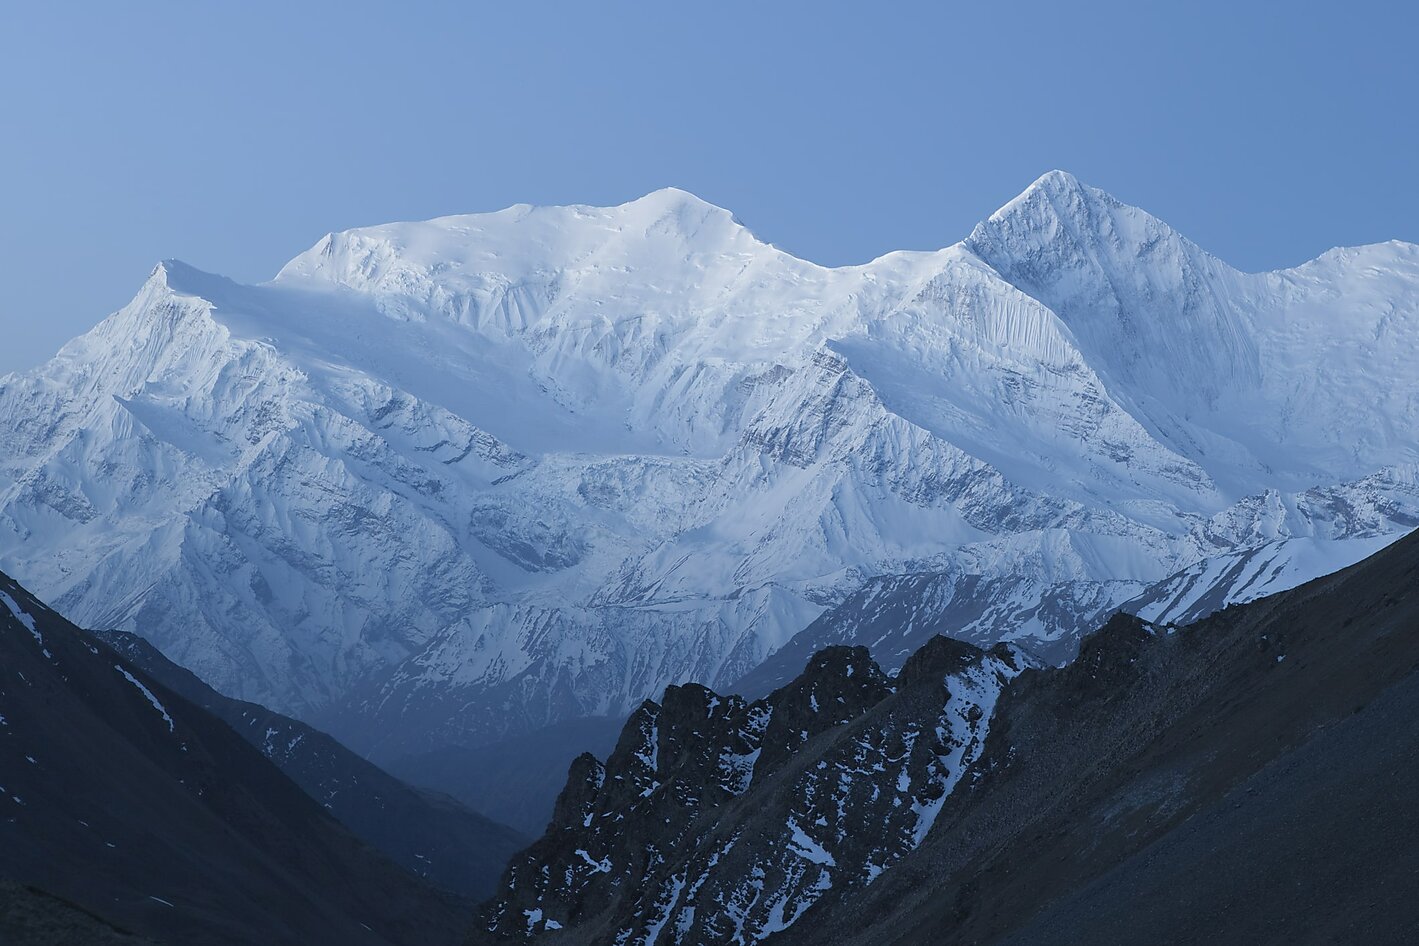 Aerial view of the Annapurna range in the Himalayas